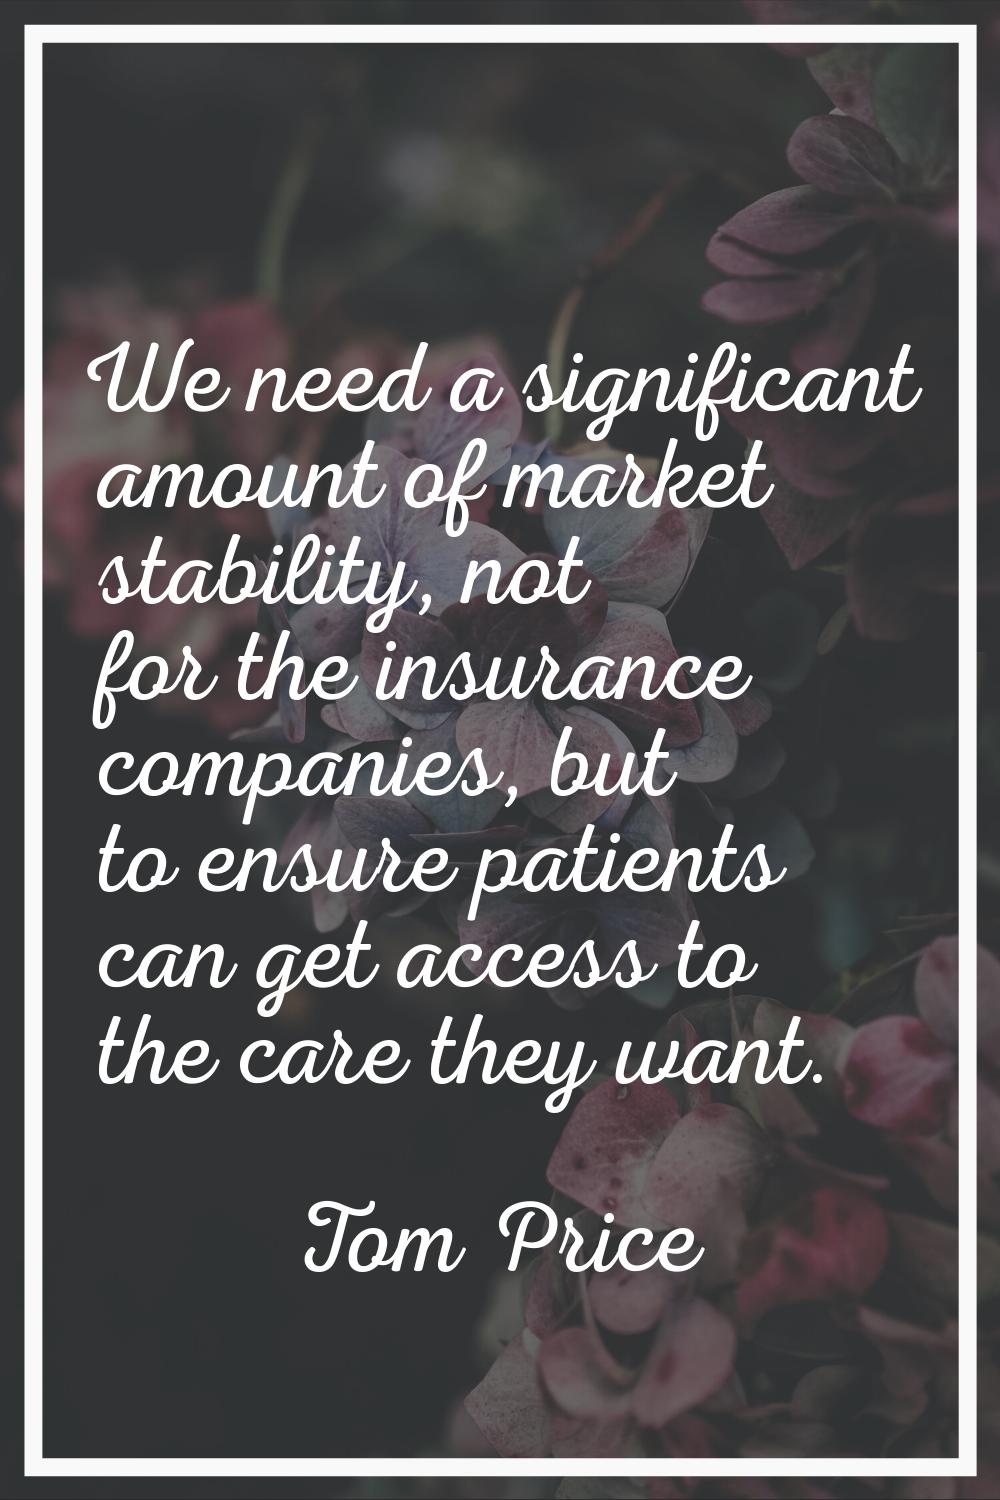 We need a significant amount of market stability, not for the insurance companies, but to ensure pa